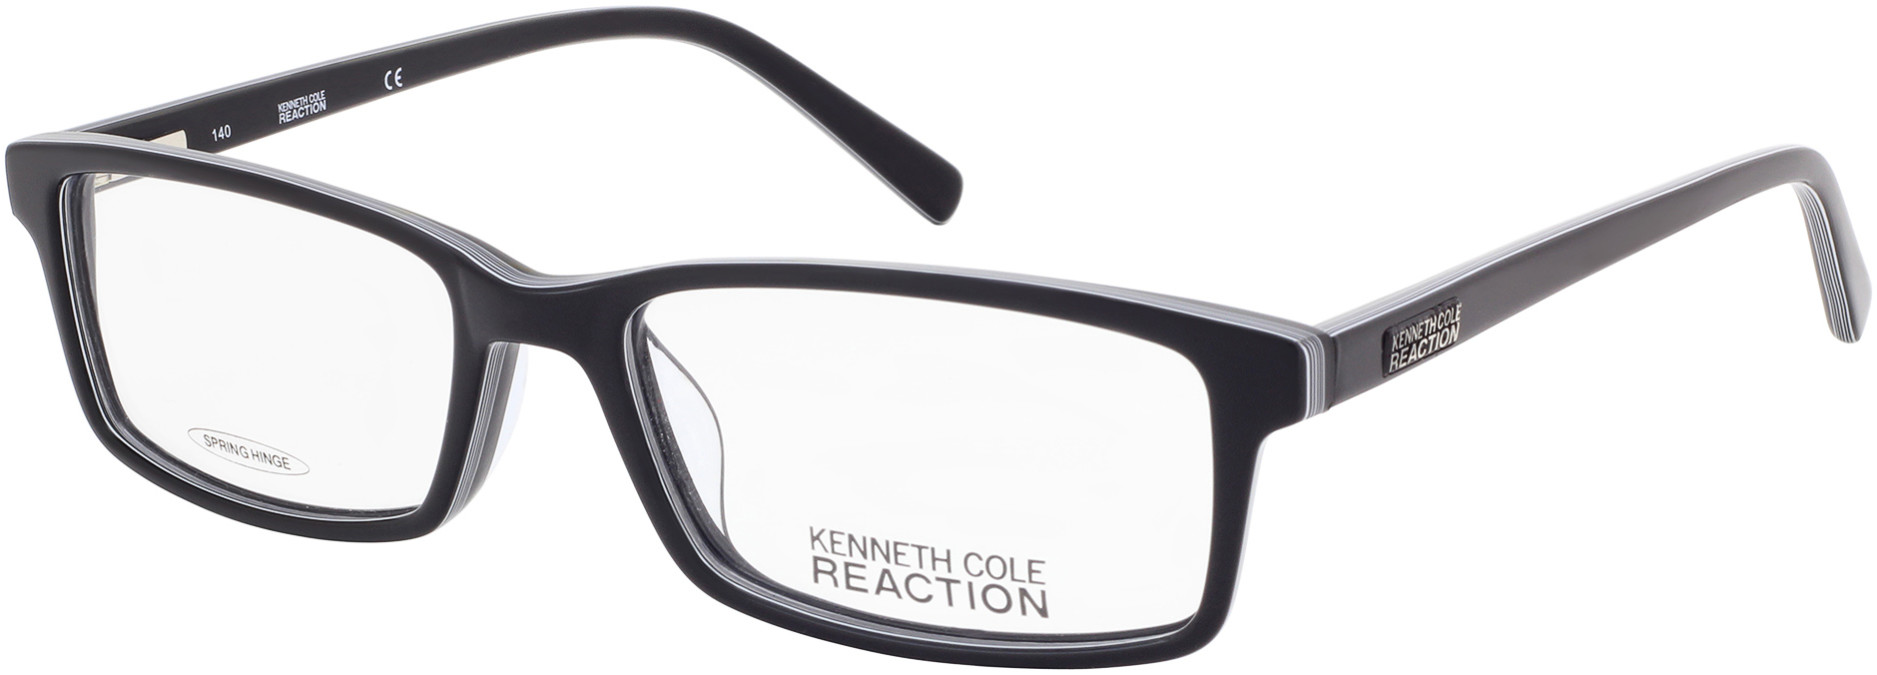 KENNETH COLE NY 0749 004